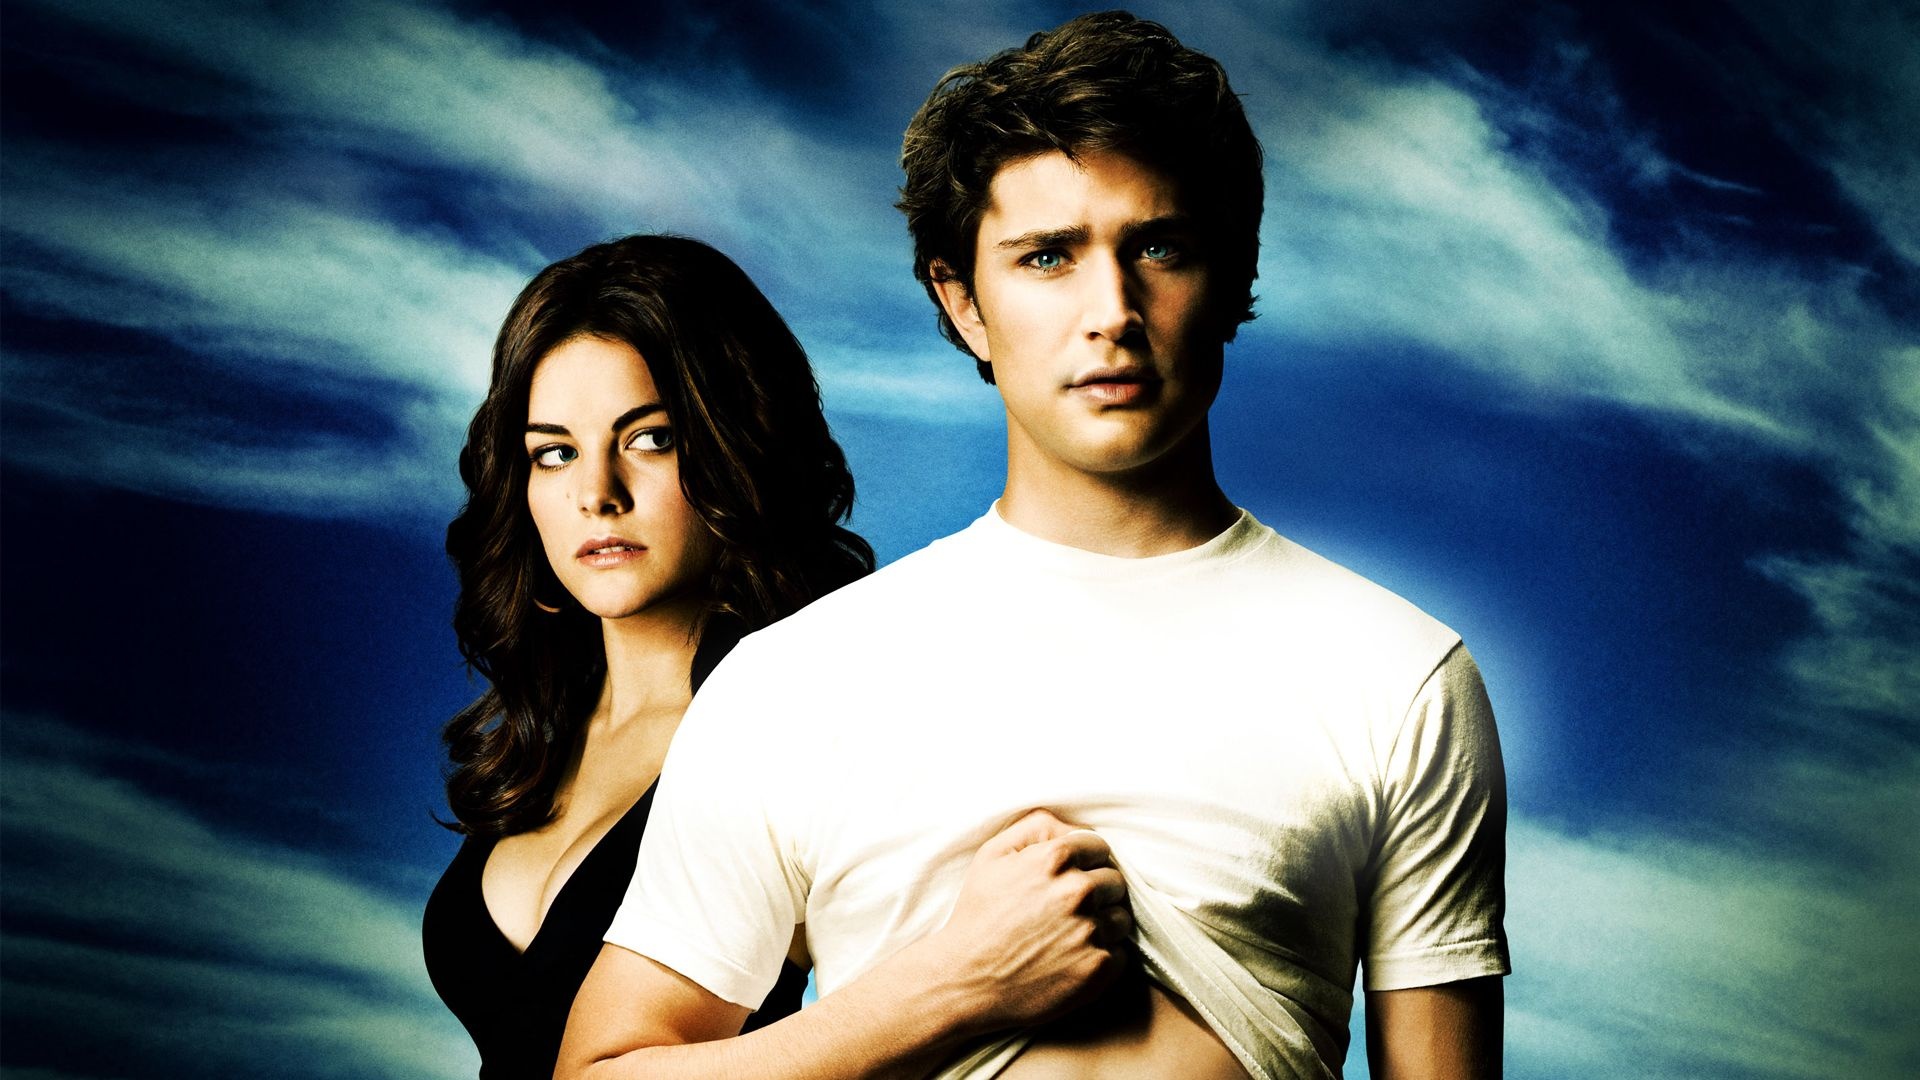 Kyle XY (TV Series): An American science fiction teen drama created by Eric Bress and J. Mackye Gruber. 1920x1080 Full HD Wallpaper.